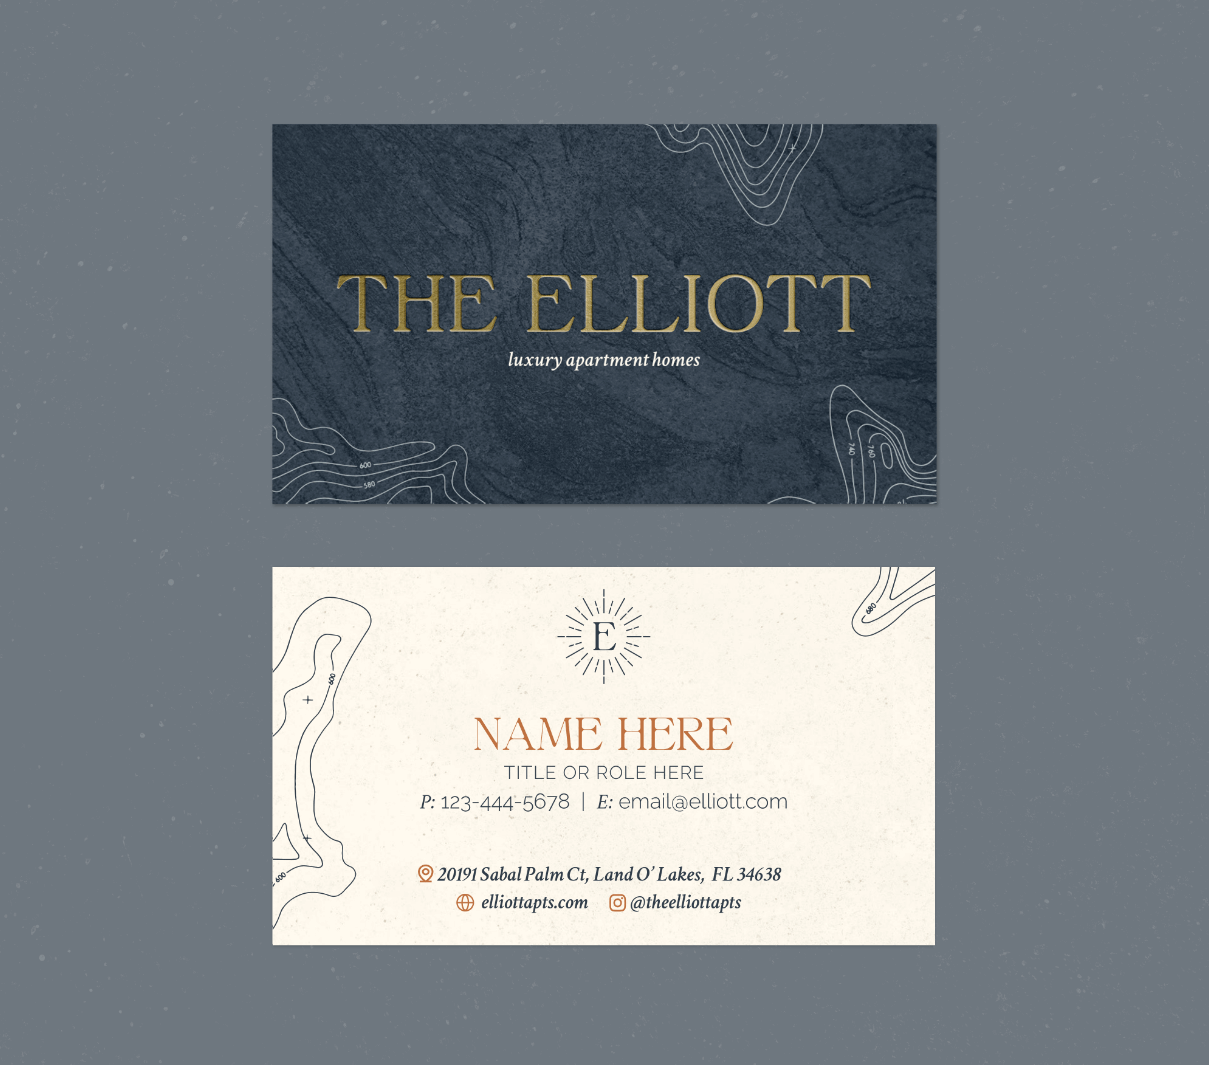 Mockup of business card design for The Elliott Apartments in Florida completed by ST8MNT